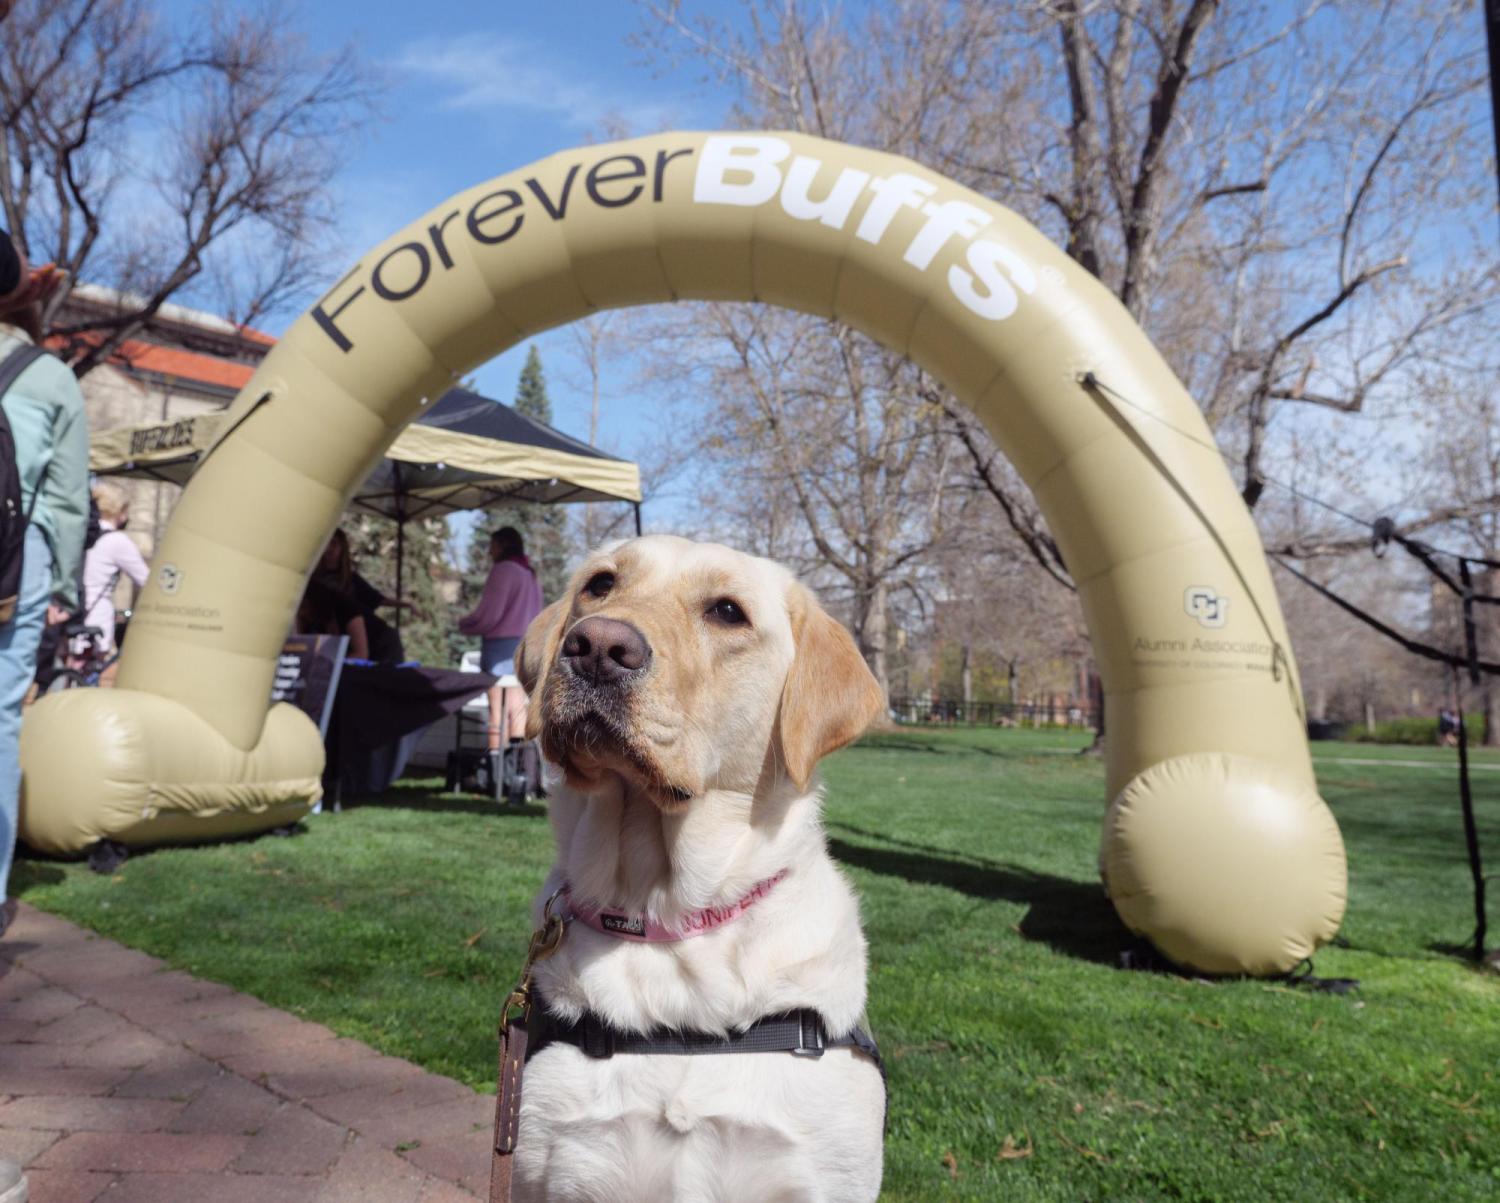 Juniper, a 2-year-old lab and service dog-in-training joins CU Boulder graduating students in line for free burritos from Mexicali Cafe in front of Hellems on the main campus from the Alumni Association as part of Grad Appreciation Days.  Juniper has been training all year long on the CU Boulder campus and will join her forever home this summer.  (Photo by Glenn Asakawa/University of Colorado)